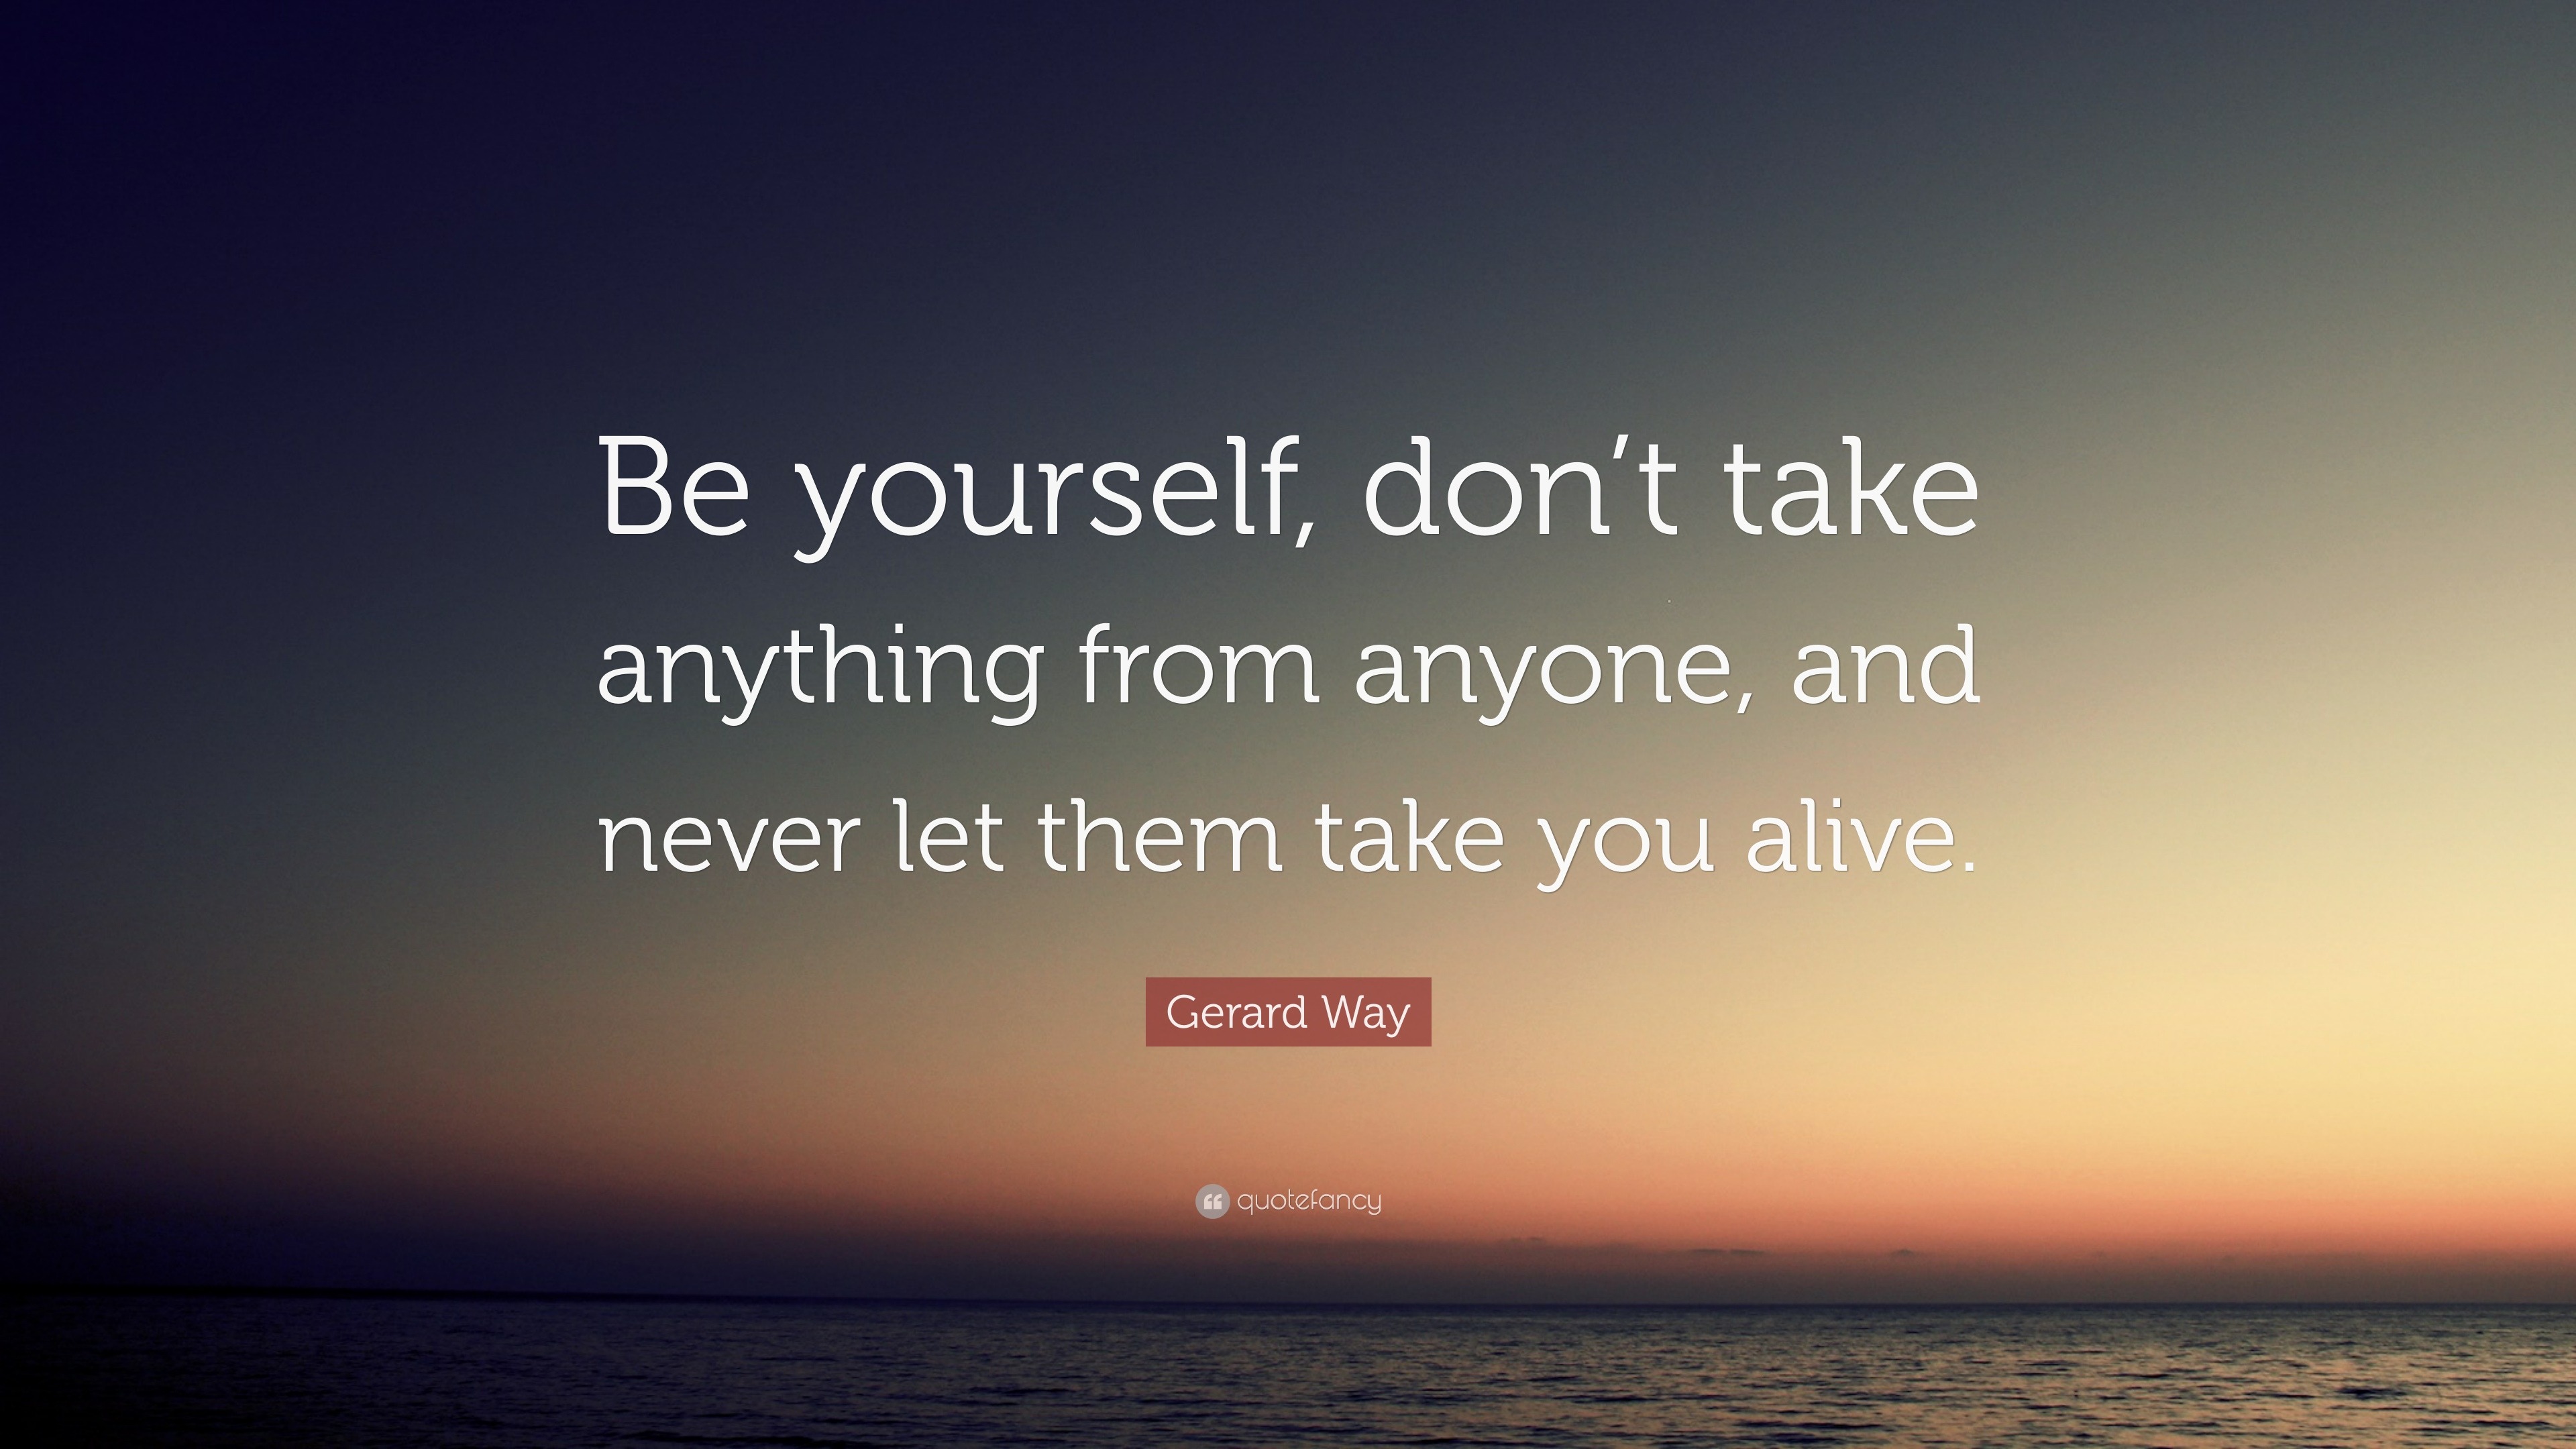 Gerard Way Quote: “Be yourself, don’t take anything from anyone, and